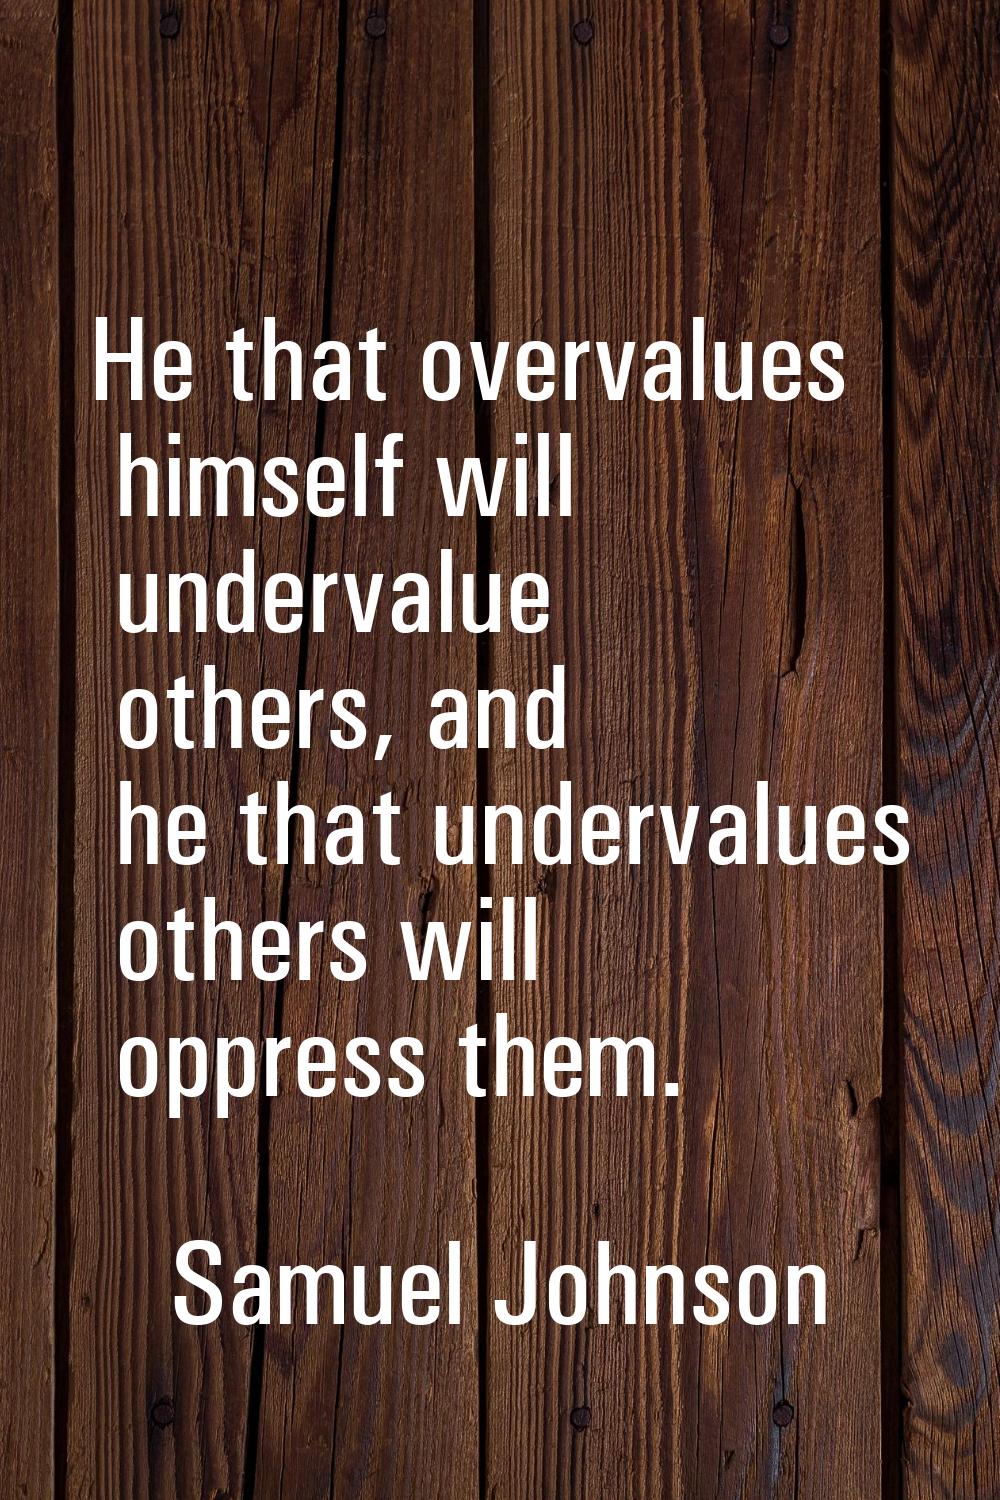 He that overvalues himself will undervalue others, and he that undervalues others will oppress them